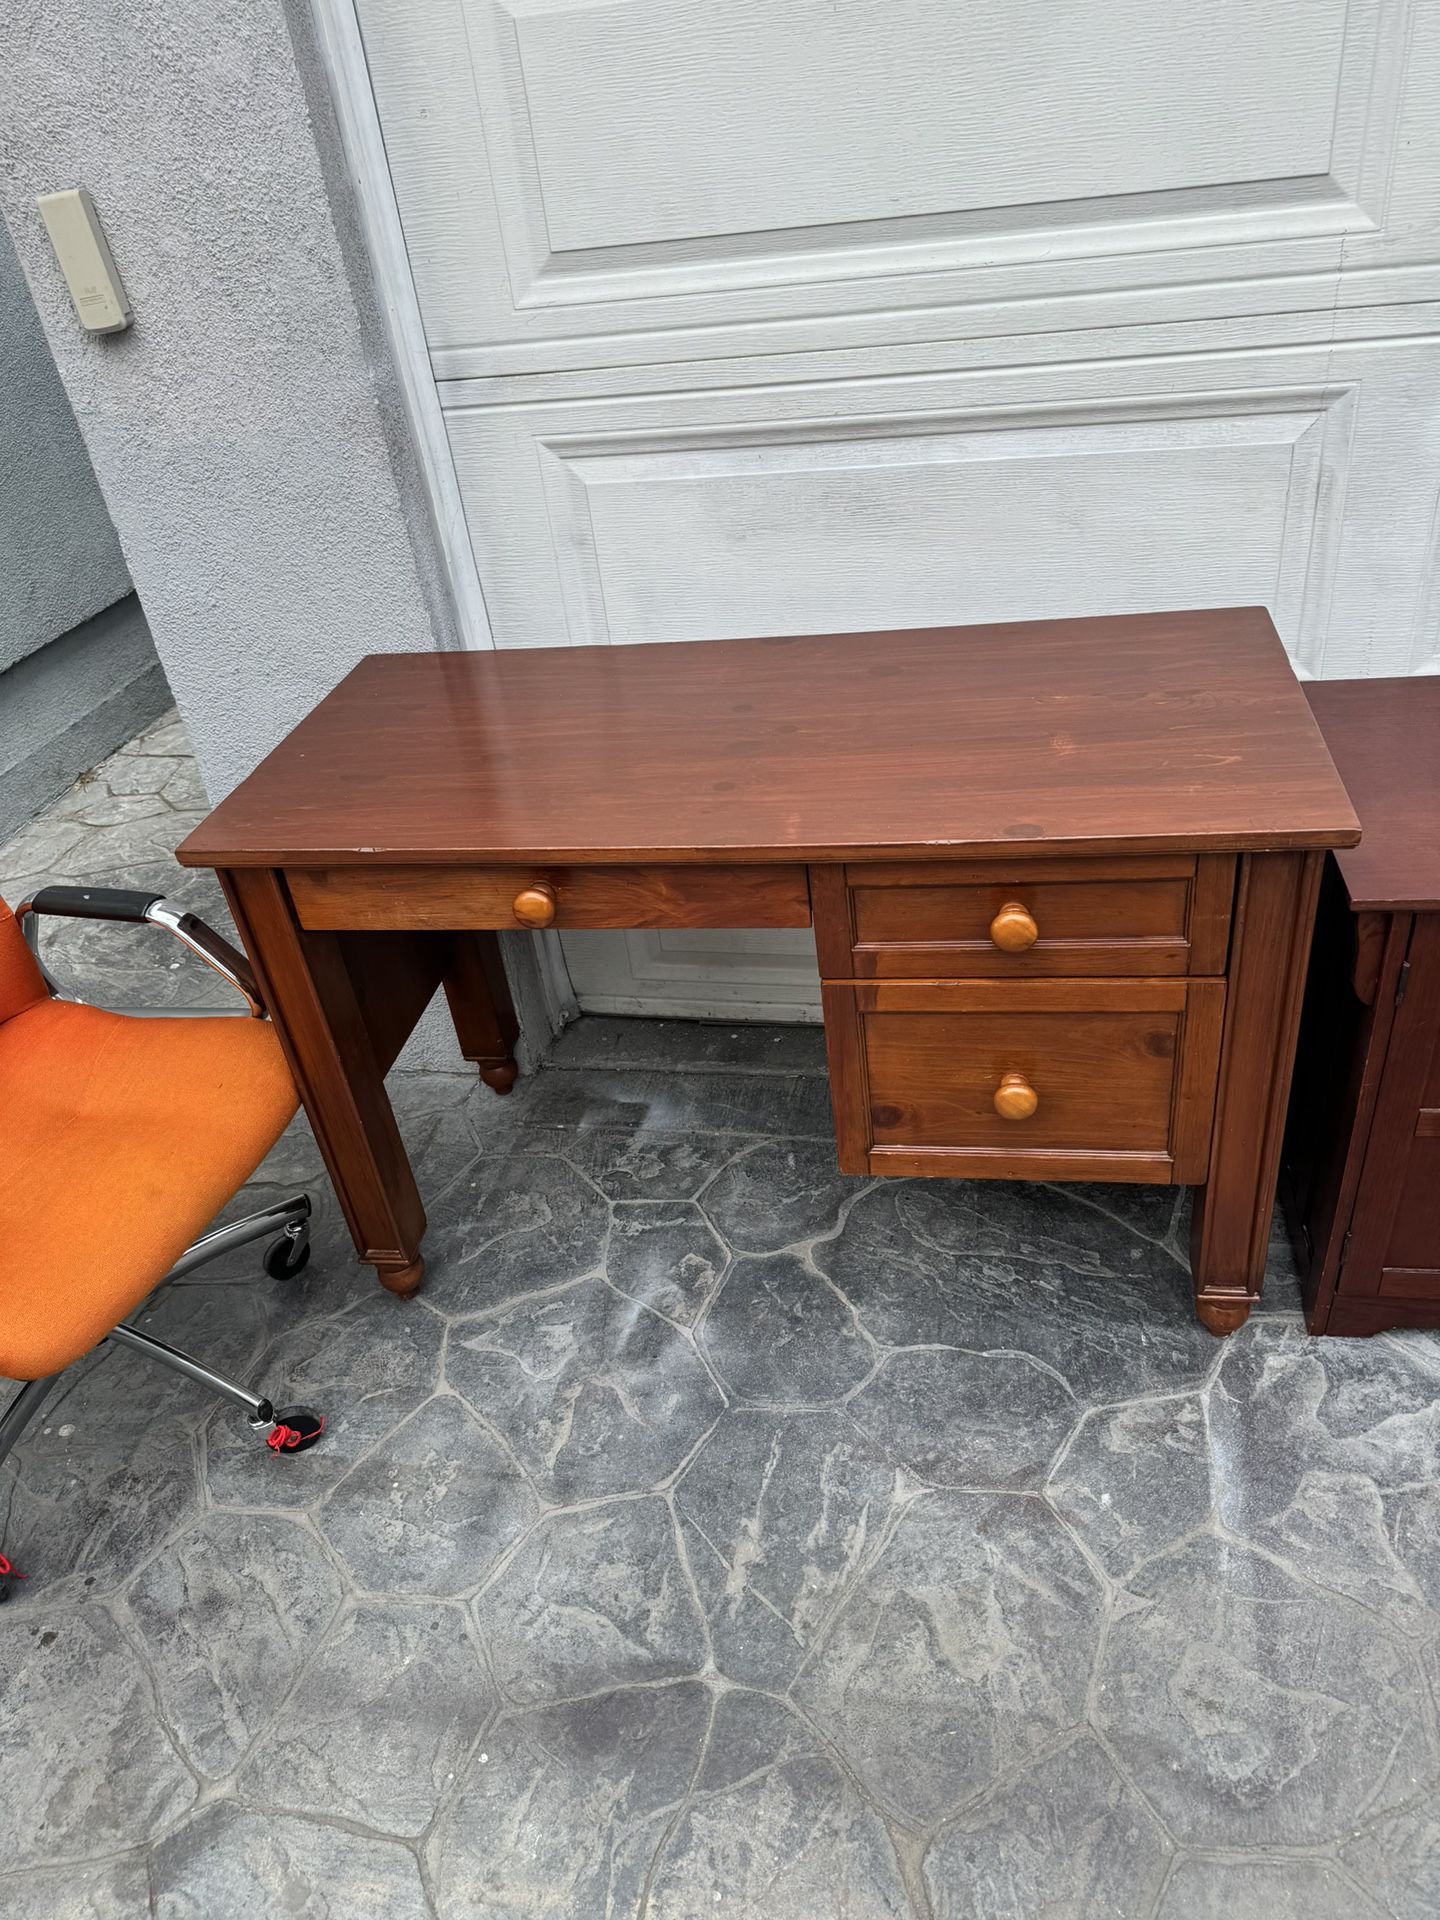 Traditional solid wood student / computer /writing / office desk w/ file folder drawer,  keyboard $75, office chair $20